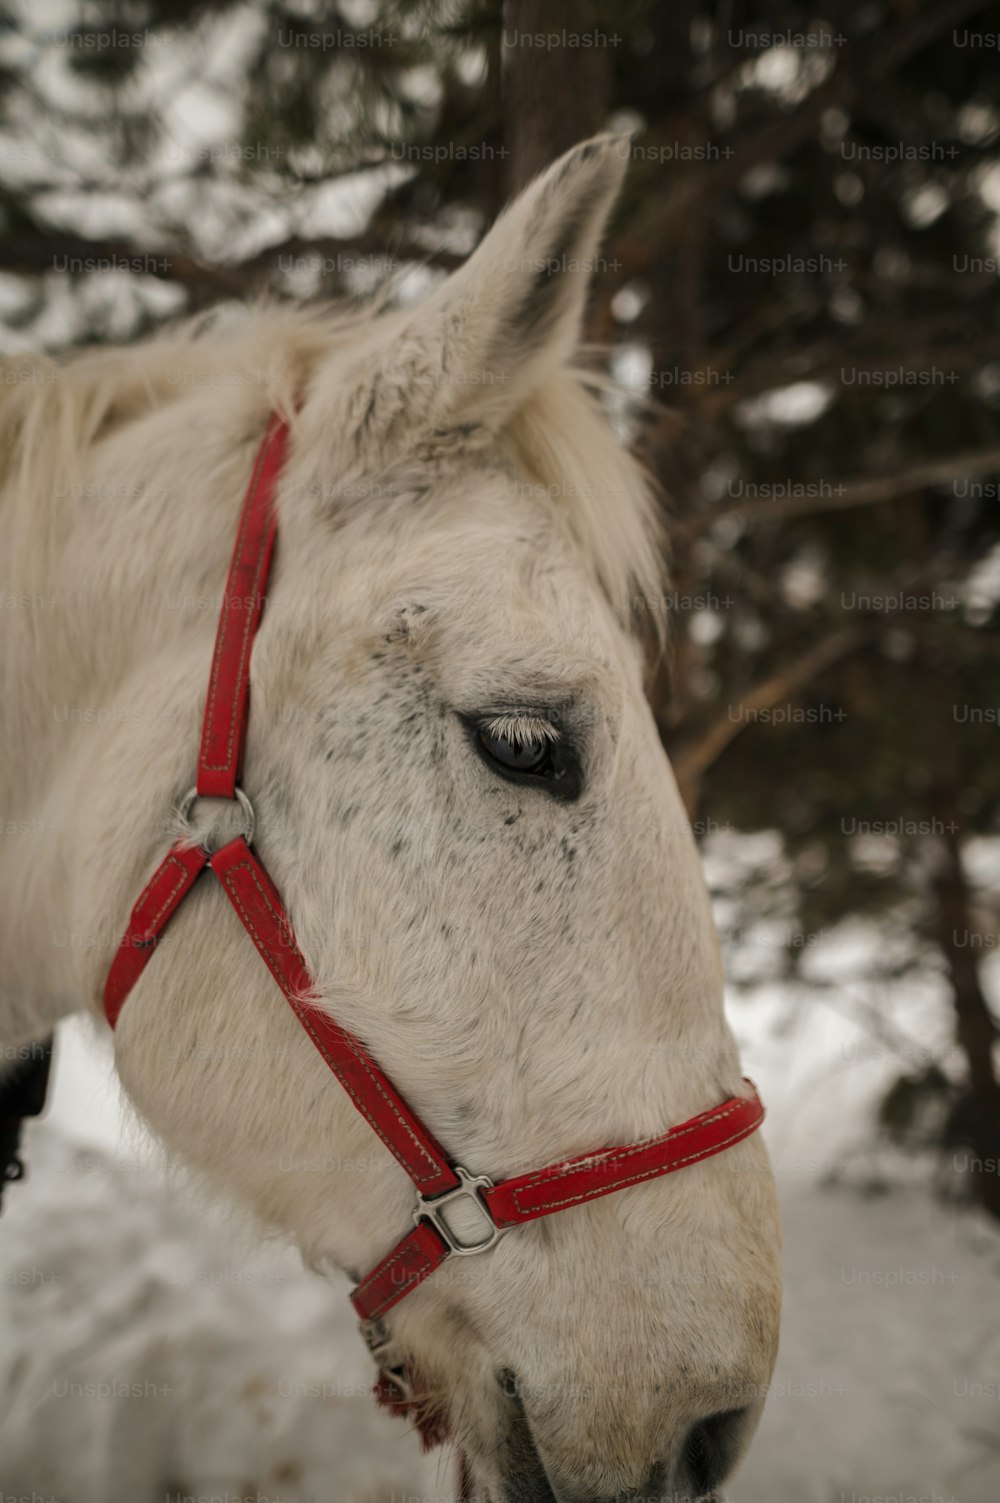 a white horse wearing a red bridle in the snow